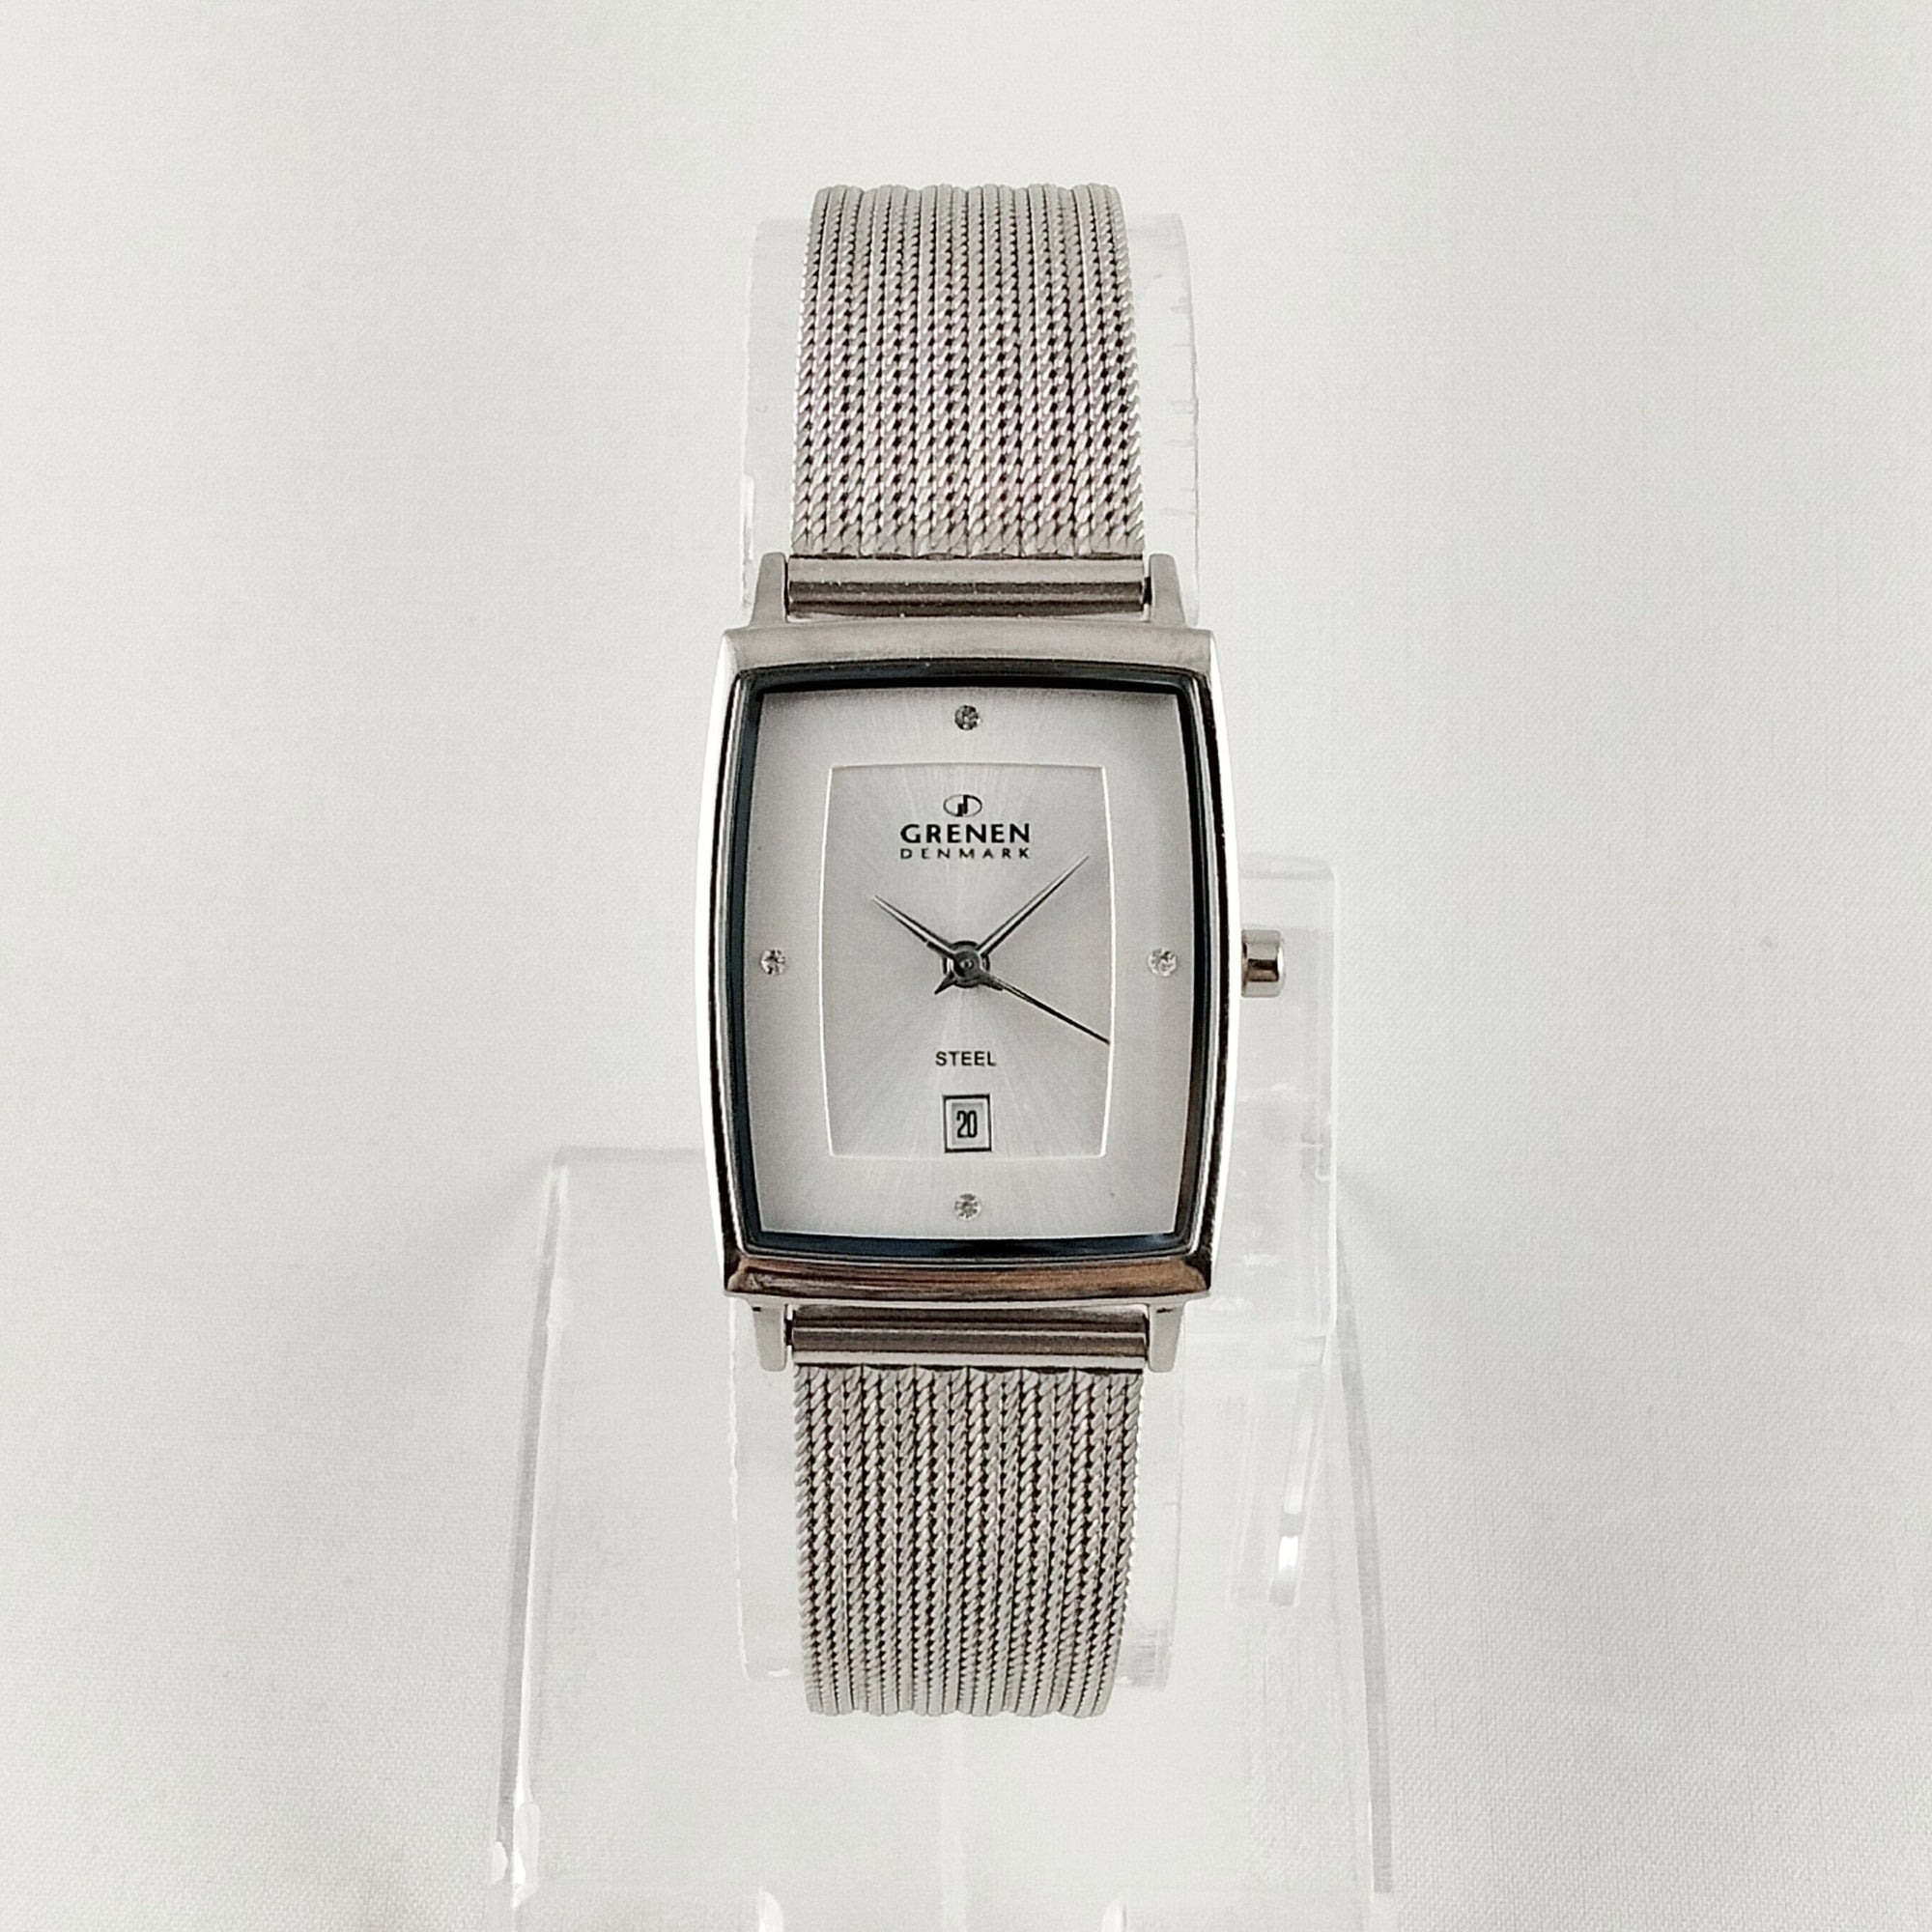 I Like Mikes Mid Century Modern Watches Grenen Women's Stainless Steel Watch, Rectangular Dial, Jewel Hour Markers, Mesh Strap